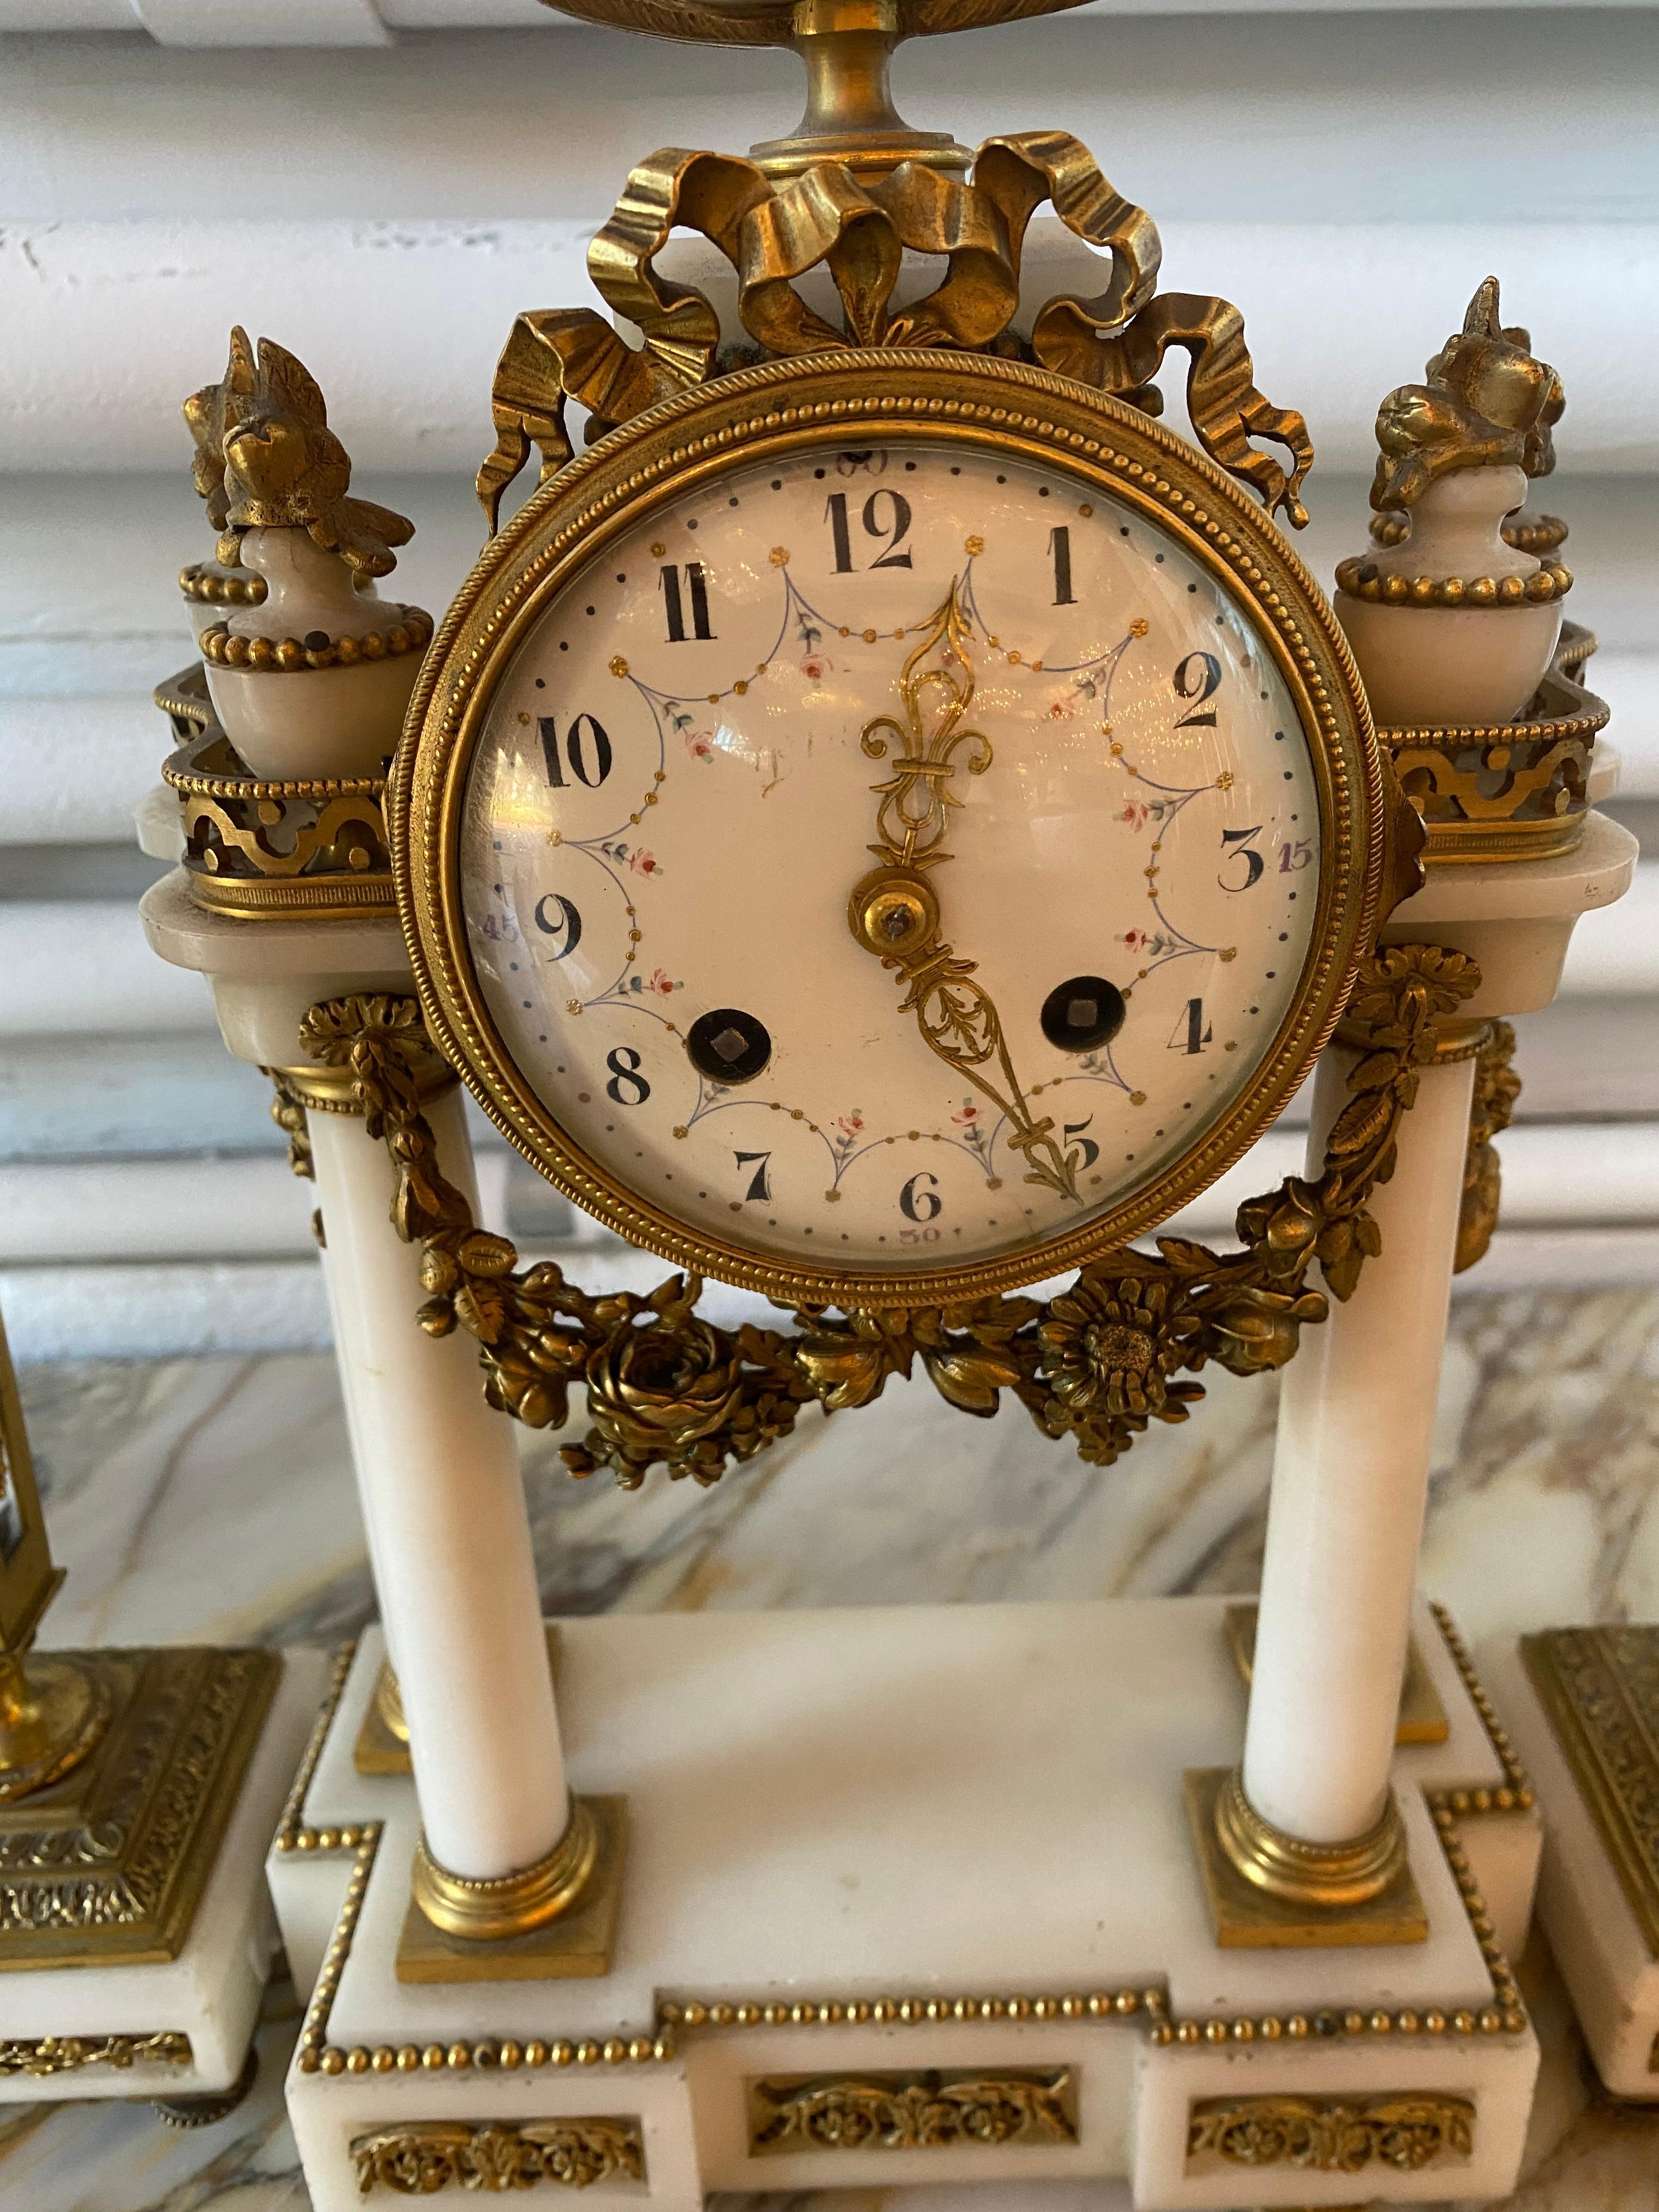 Planchon, Paris Japy Freres bronze and marble clock set. The candlesticks has a crystal inside the column. Clock.
Measures: Clock: 15 7/8” H x 8 3/4” W x 3 7/8” D. Candlesticks: 9 3/4” H x 3 1/2” W x 3 1/2” D.